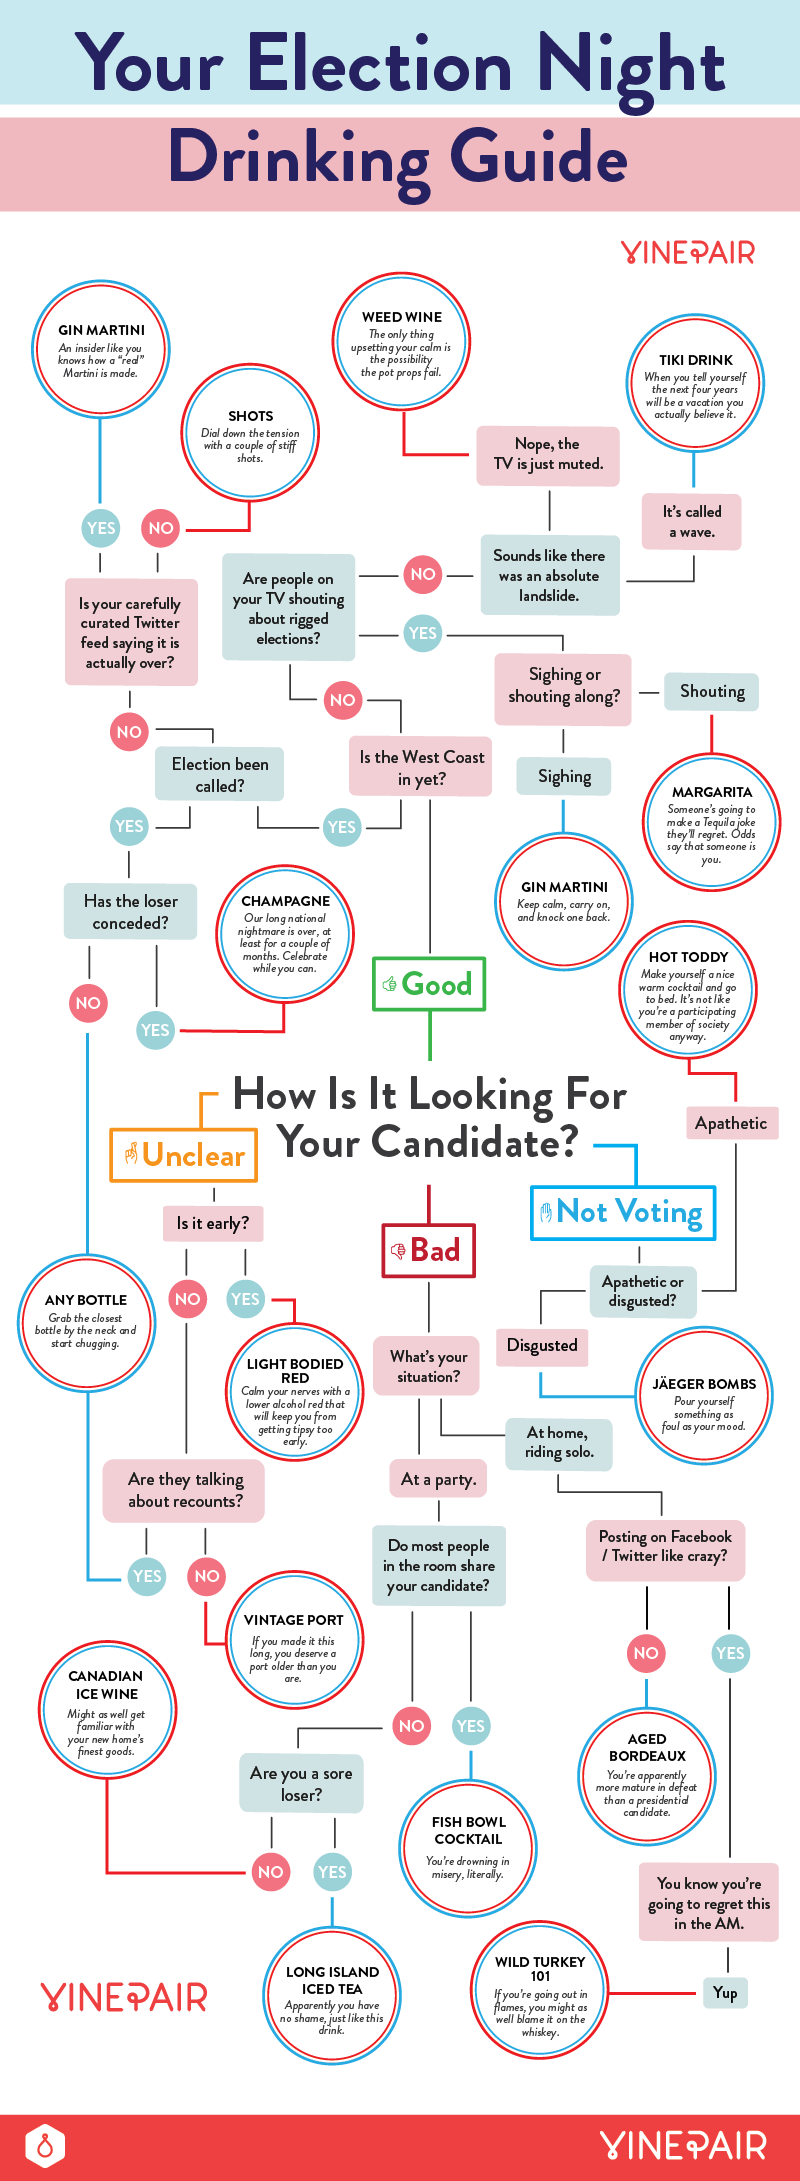 Your Election Night Drinking Guide [INFOGRAPHIC]